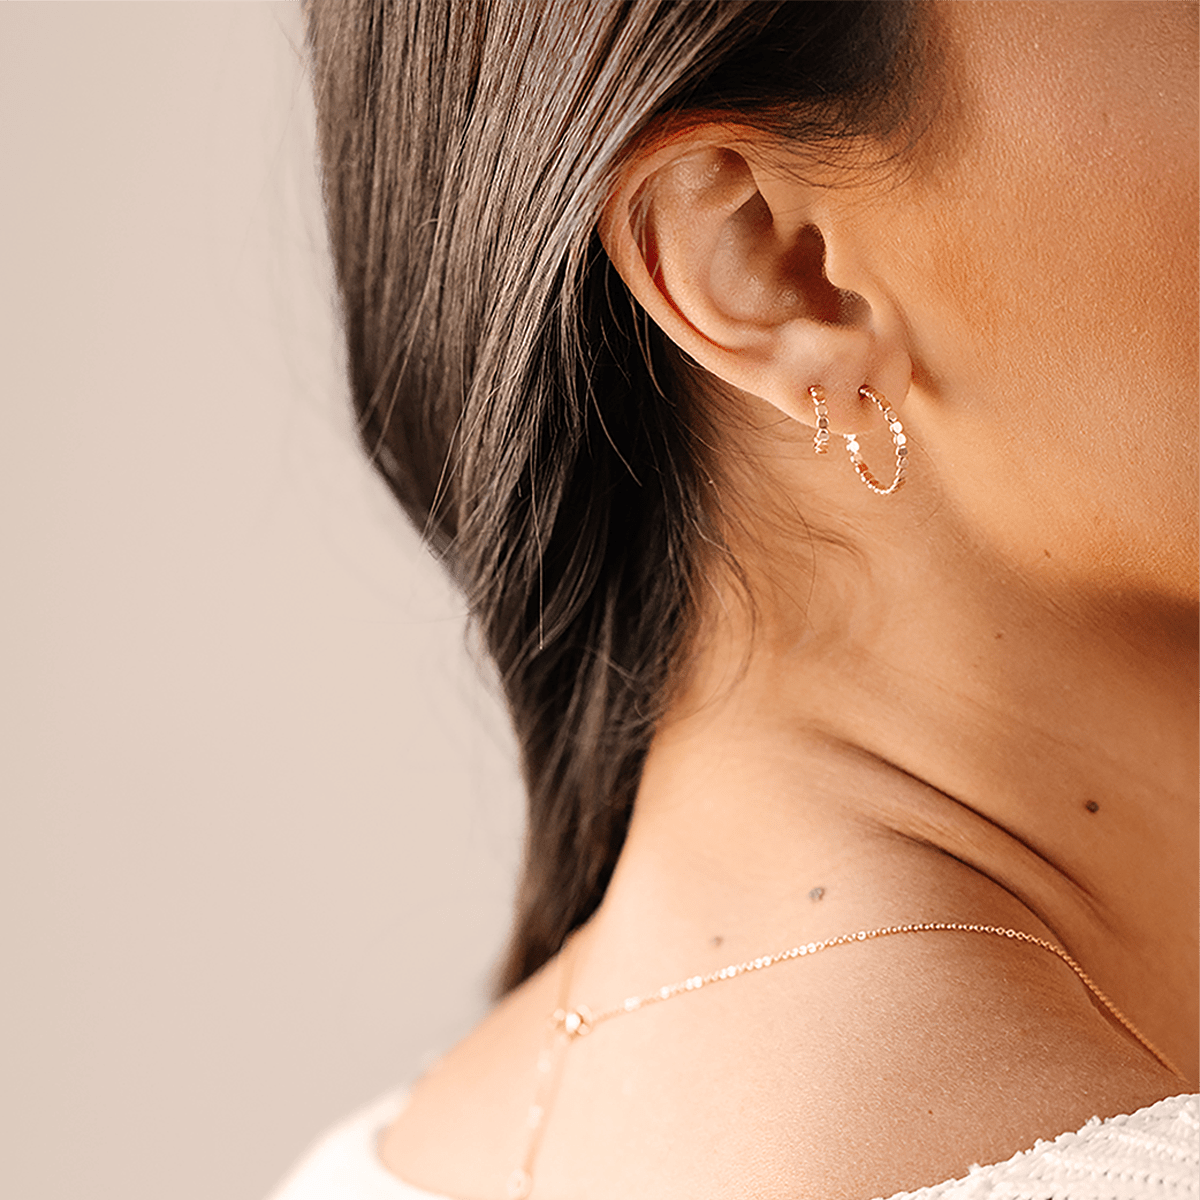 Double Piercing Earrings: Unlock Your Style Potential - Today Dresses